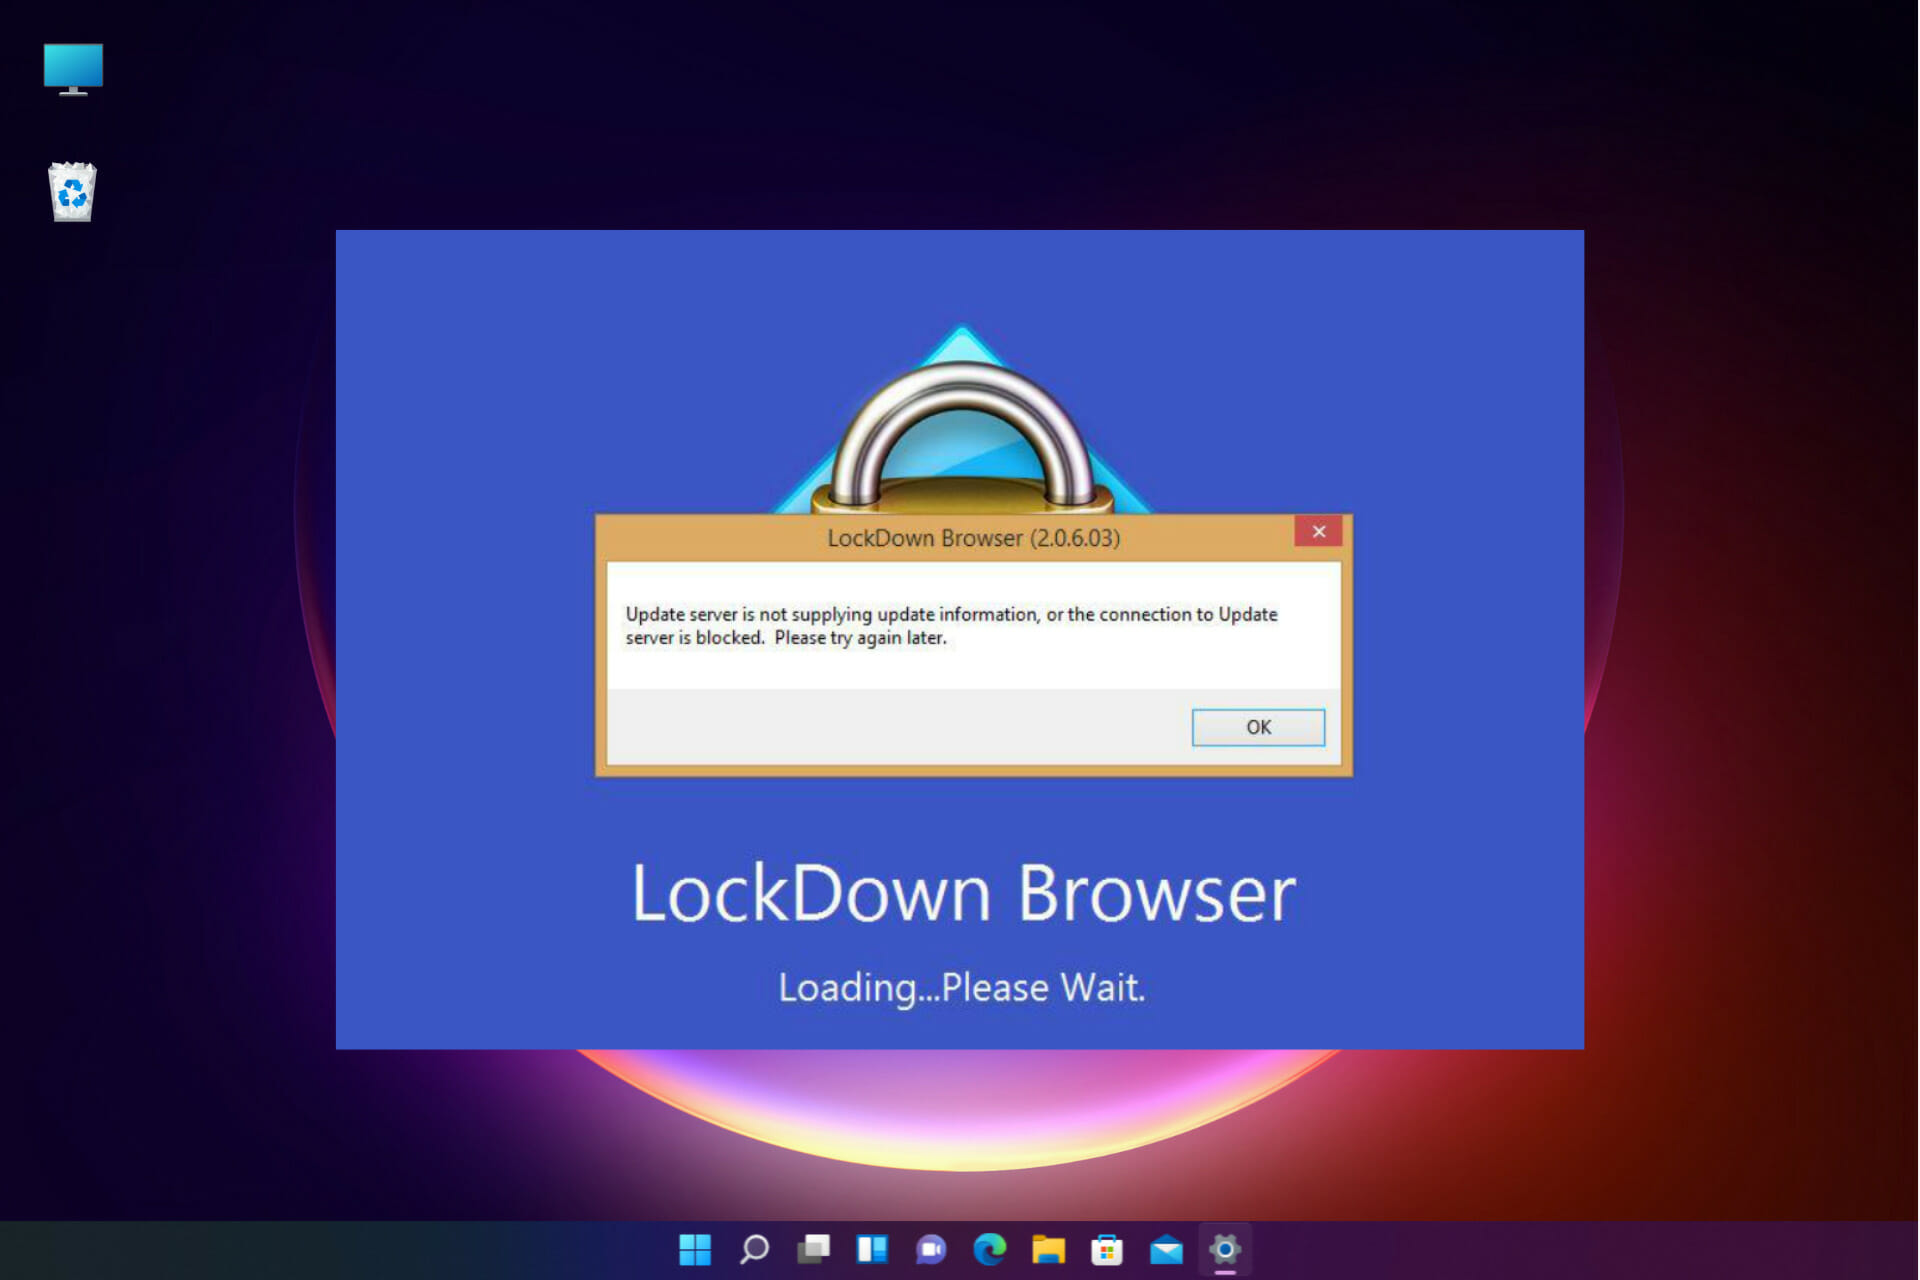 What to do if LockDown Browser update server is not supplying update information